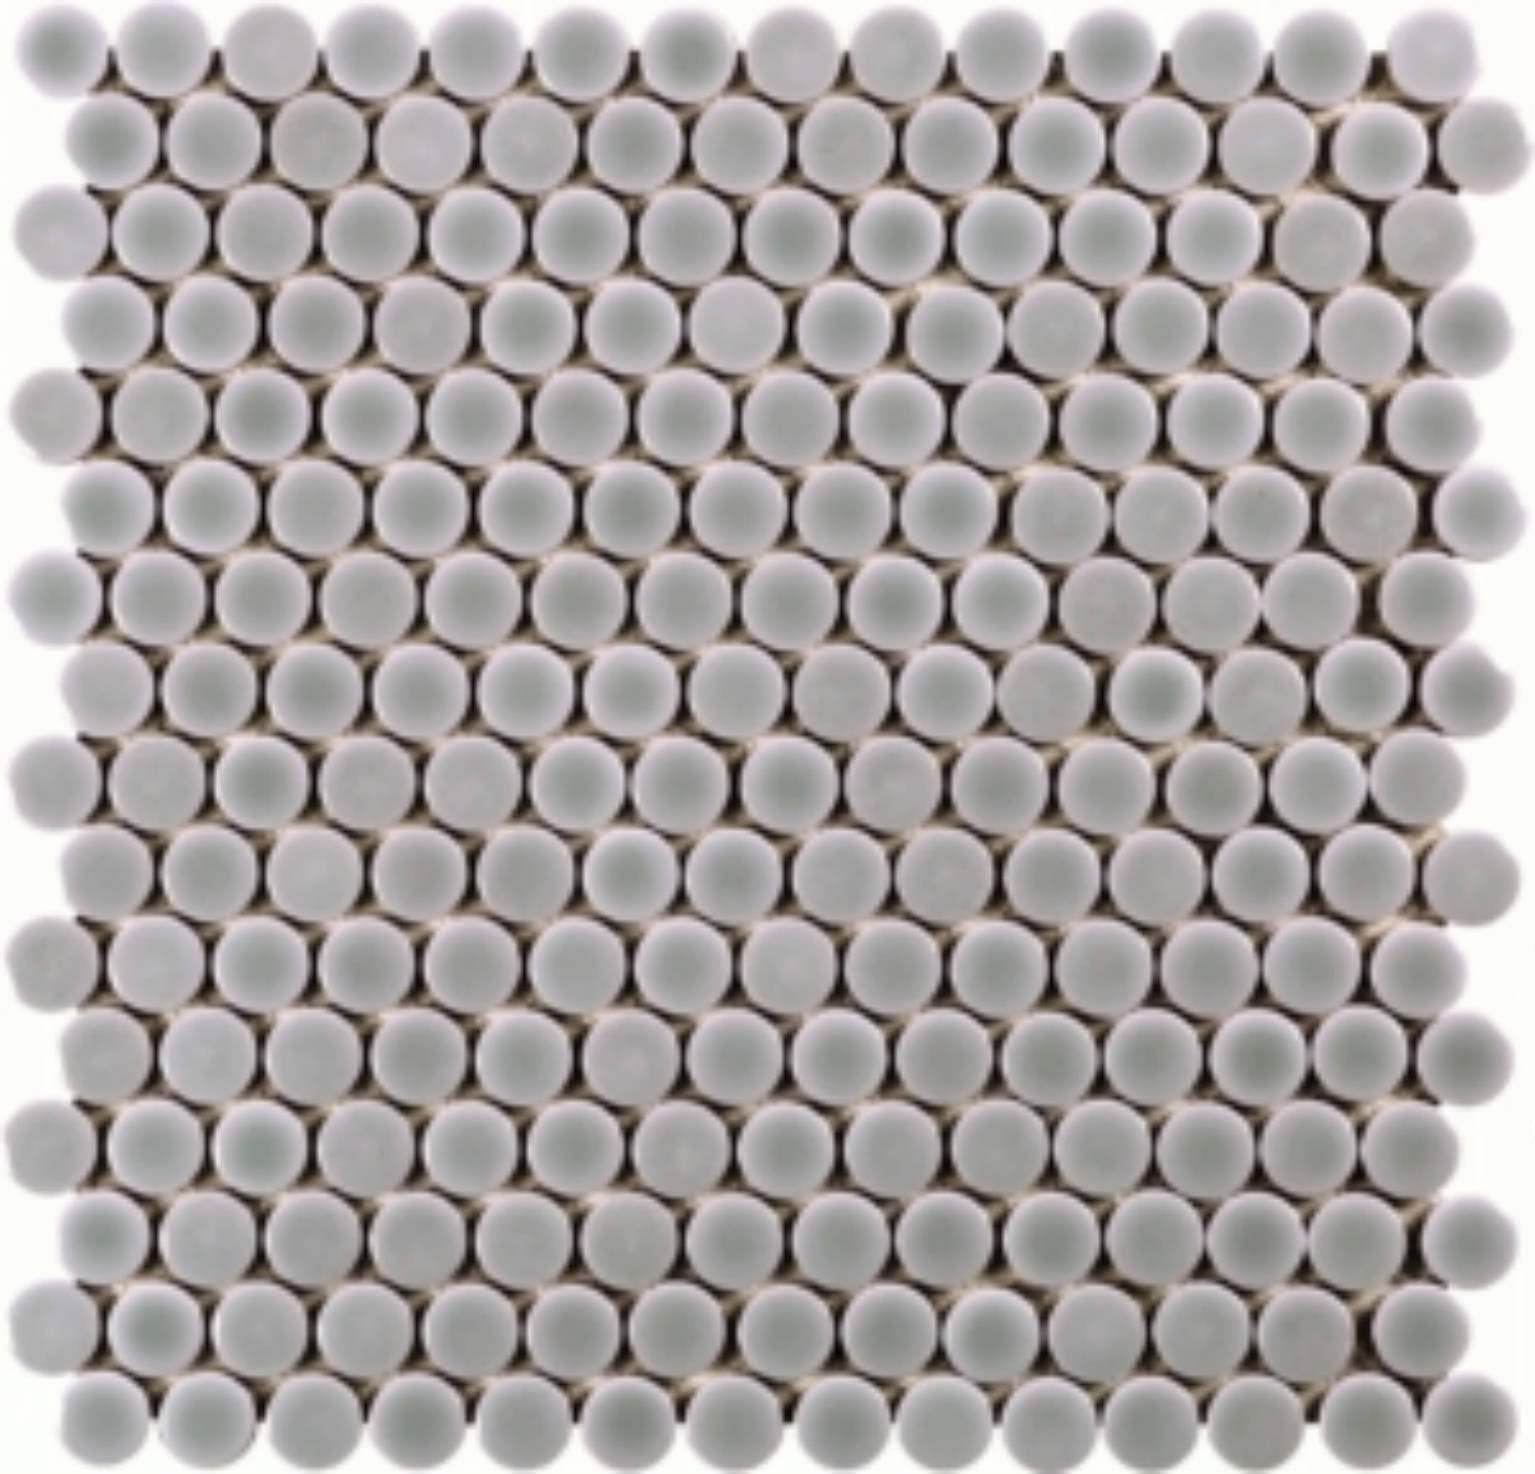 Penny Rounds Collection ¾” Penny Round Mosaic Tile | Adex USA